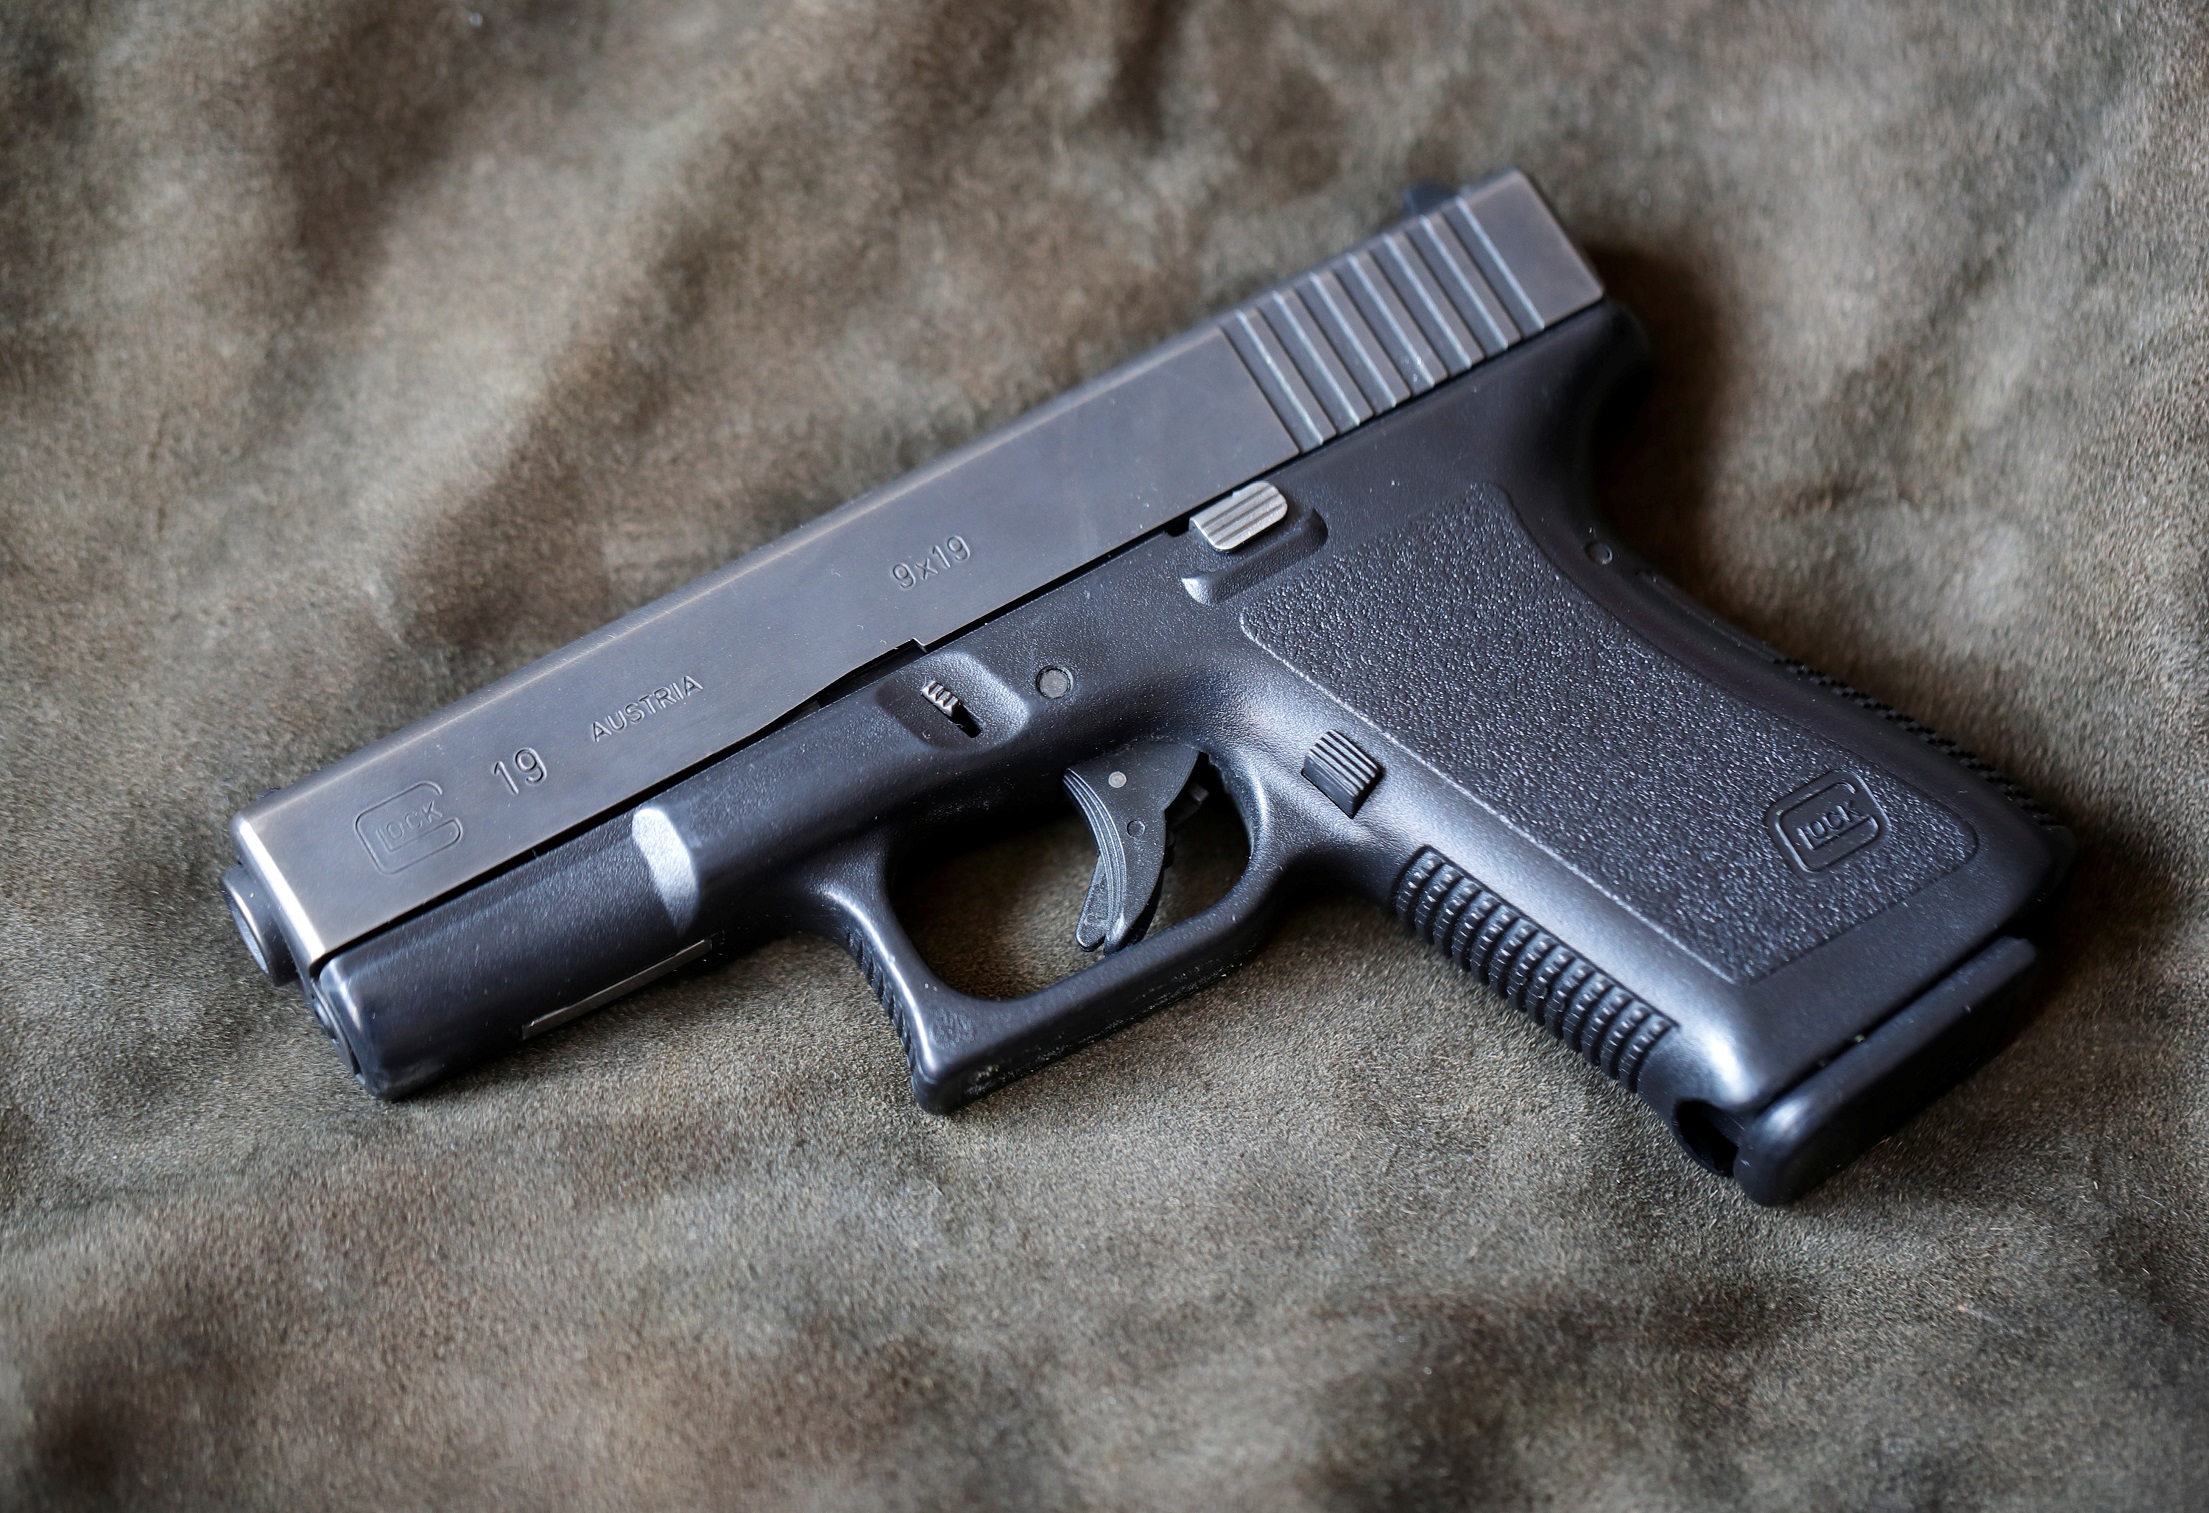 Why The Glock 19 And Ruger Gp100 Are 2 Of The Best Guns On The Planet For Self Defense The National Interest